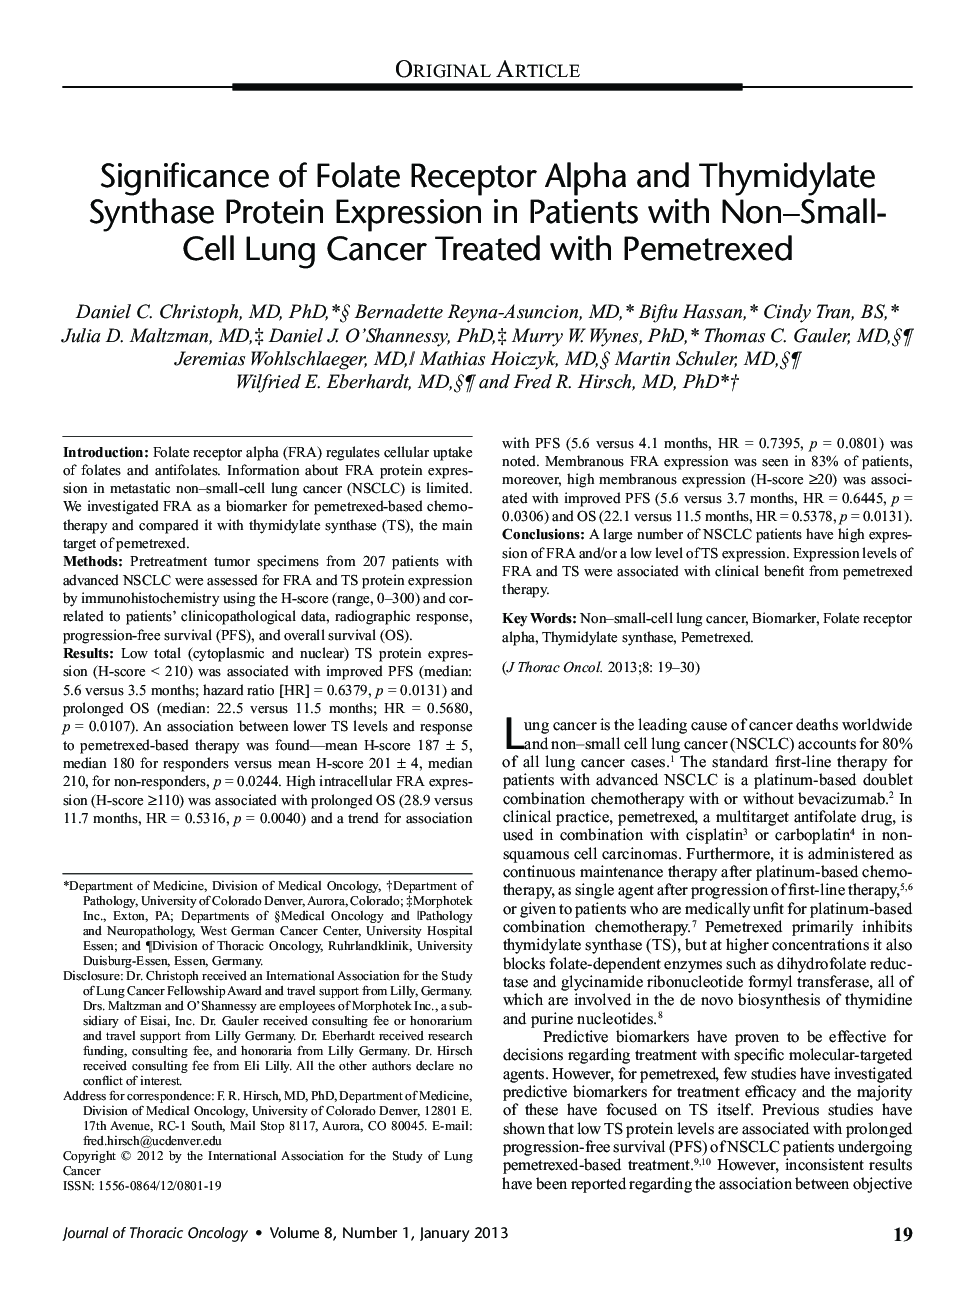 Significance of Folate Receptor Alpha and Thymidylate Synthase Protein Expression in Patients with Non–Small-Cell Lung Cancer Treated with Pemetrexed 